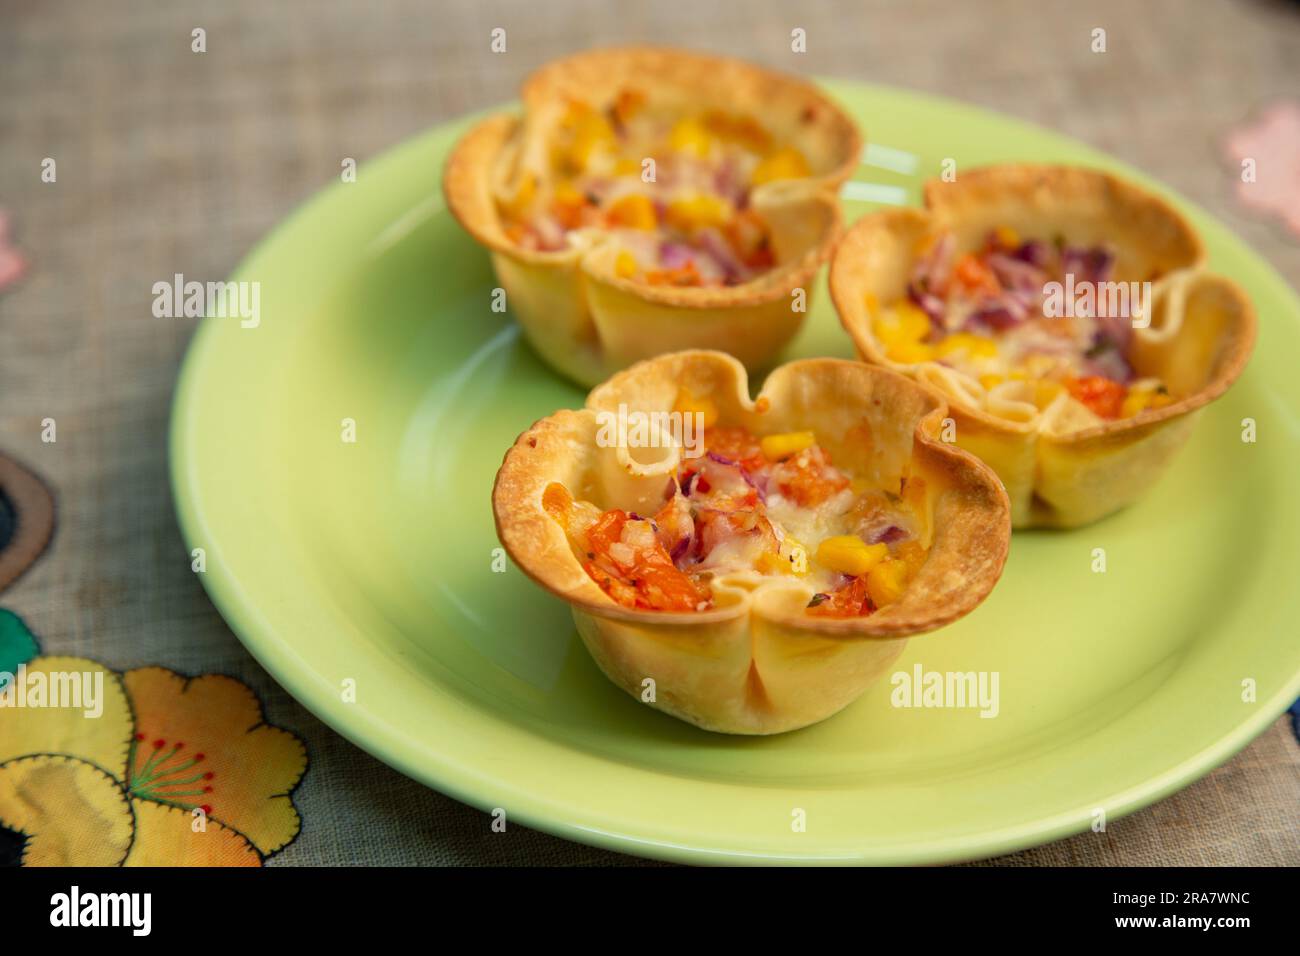 Baked pastry cup filled with cheese and tomatoes, a delectable and savory appetizer or snack Stock Photo